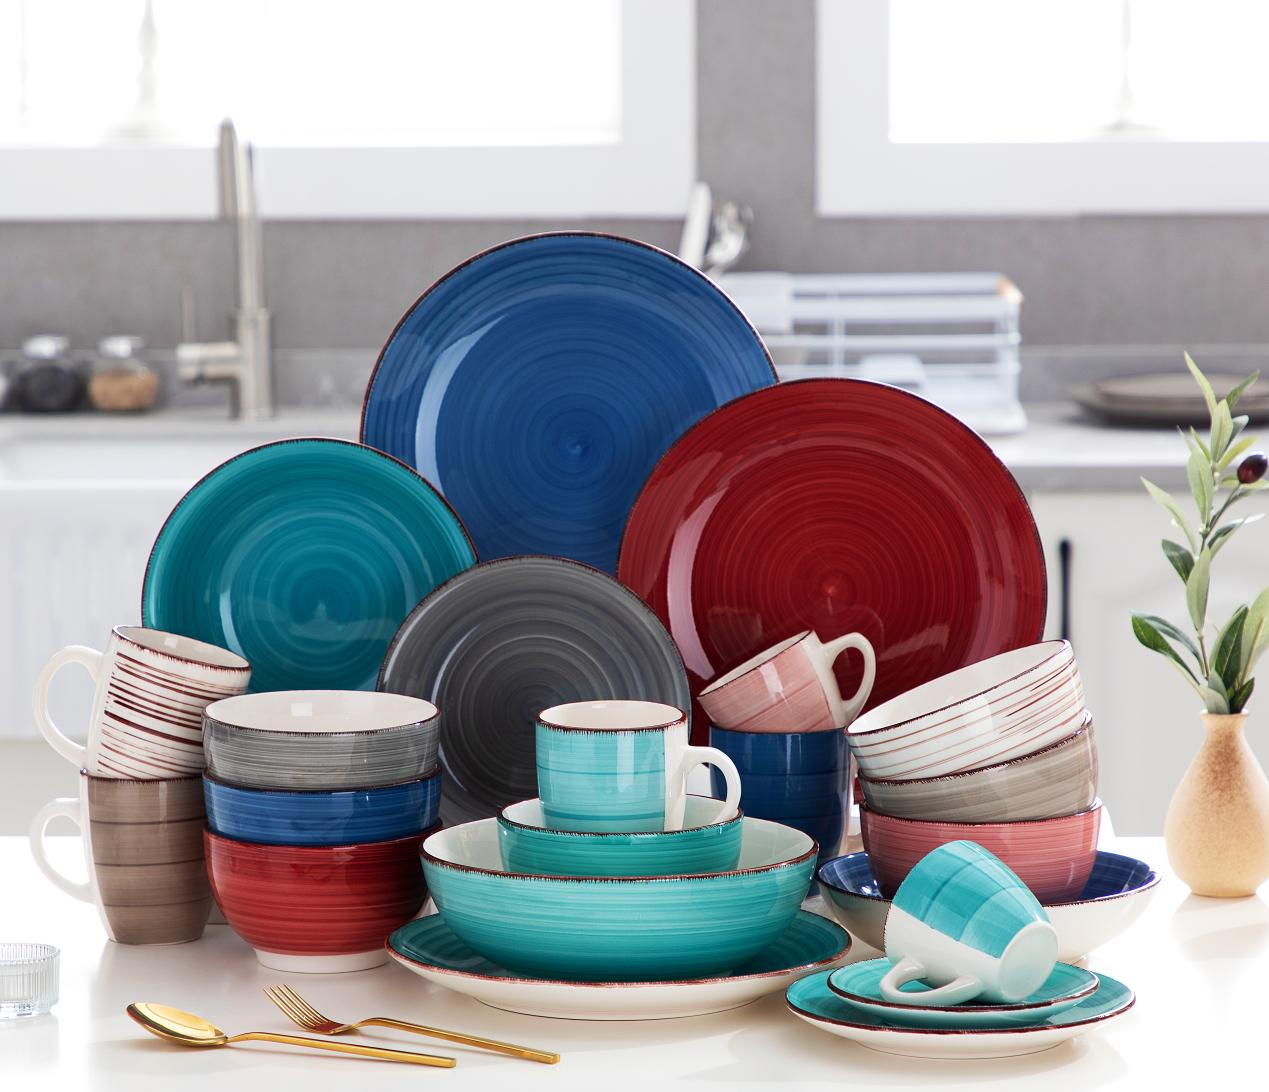 Bring Some Color to the Dining Table with Vancasso's Vibrant Dinnerware Sets